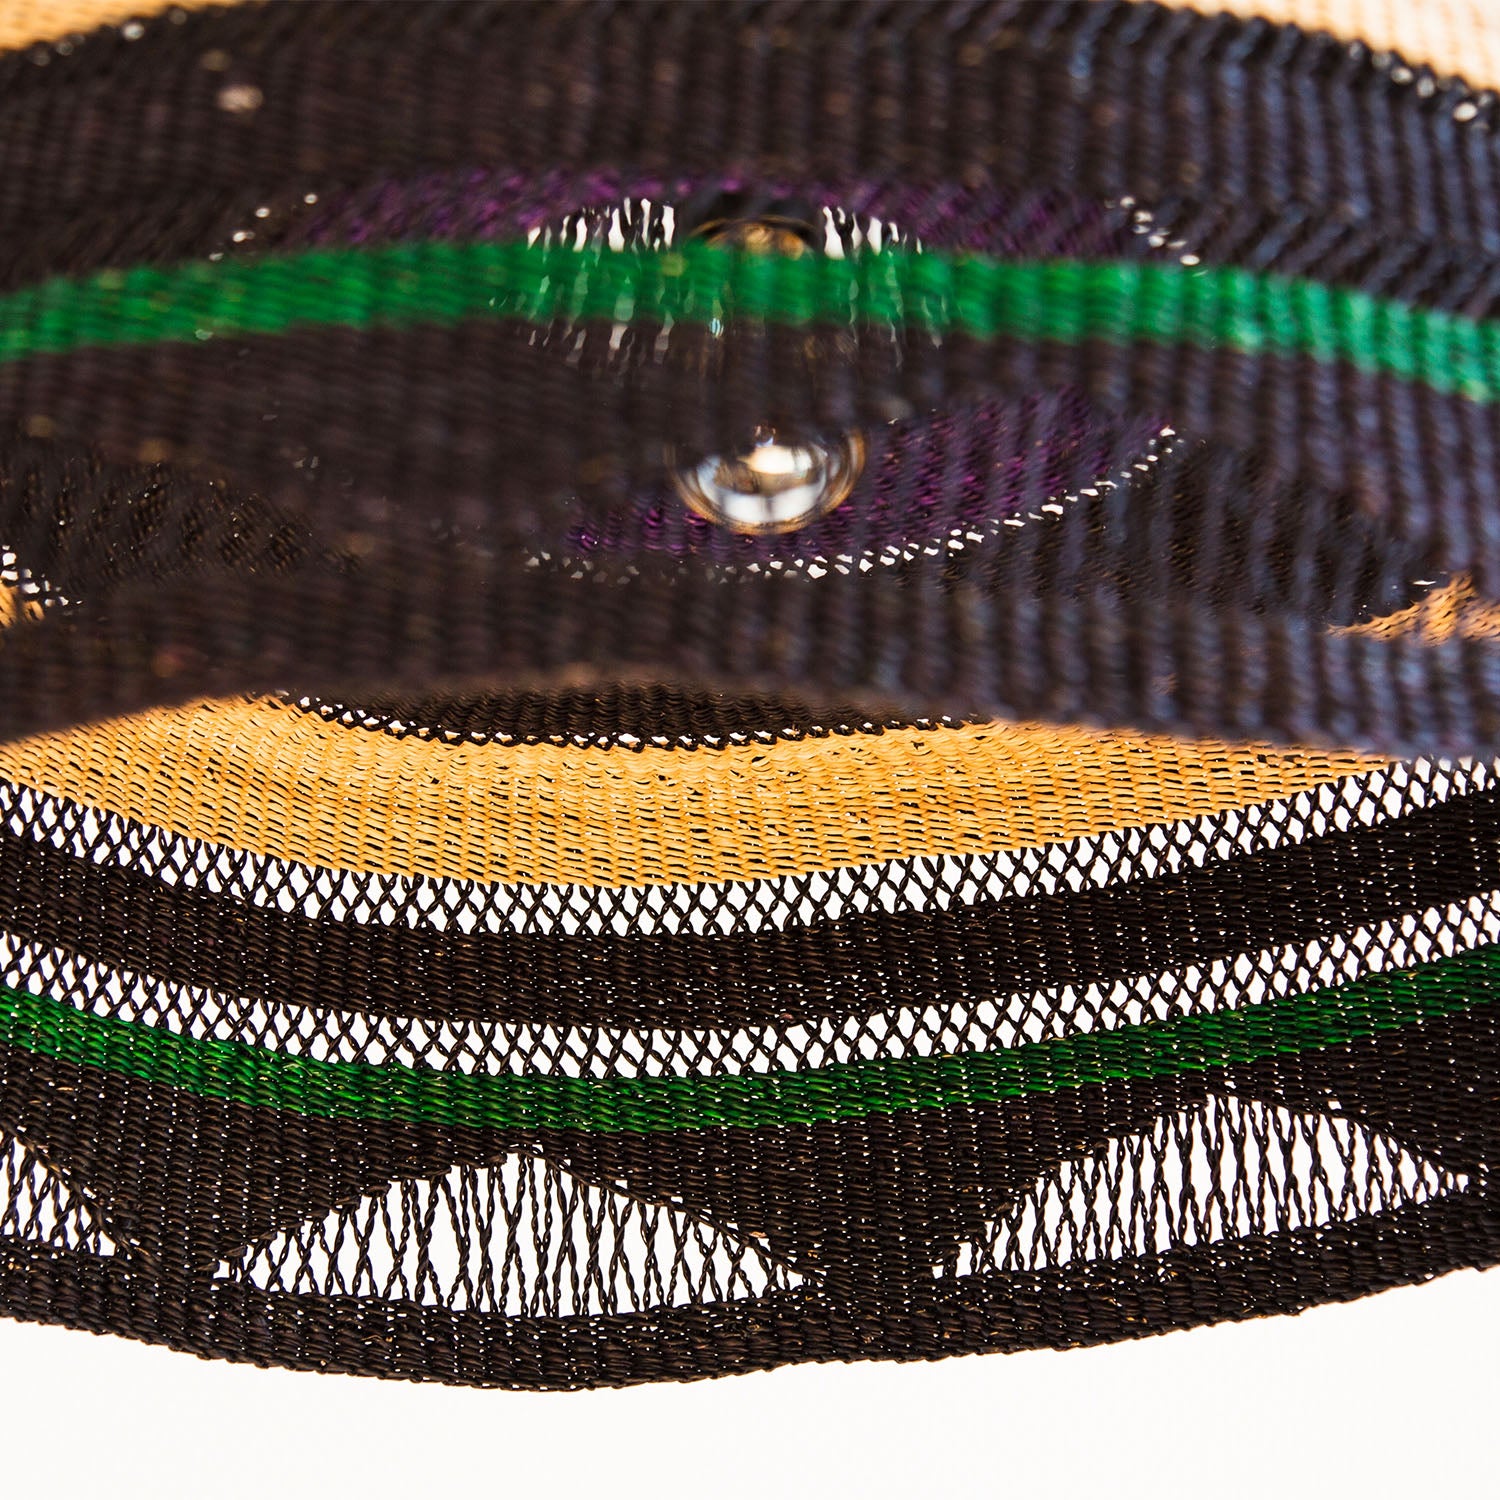 Close-up of a colorful, layered mesh fabric with water droplet